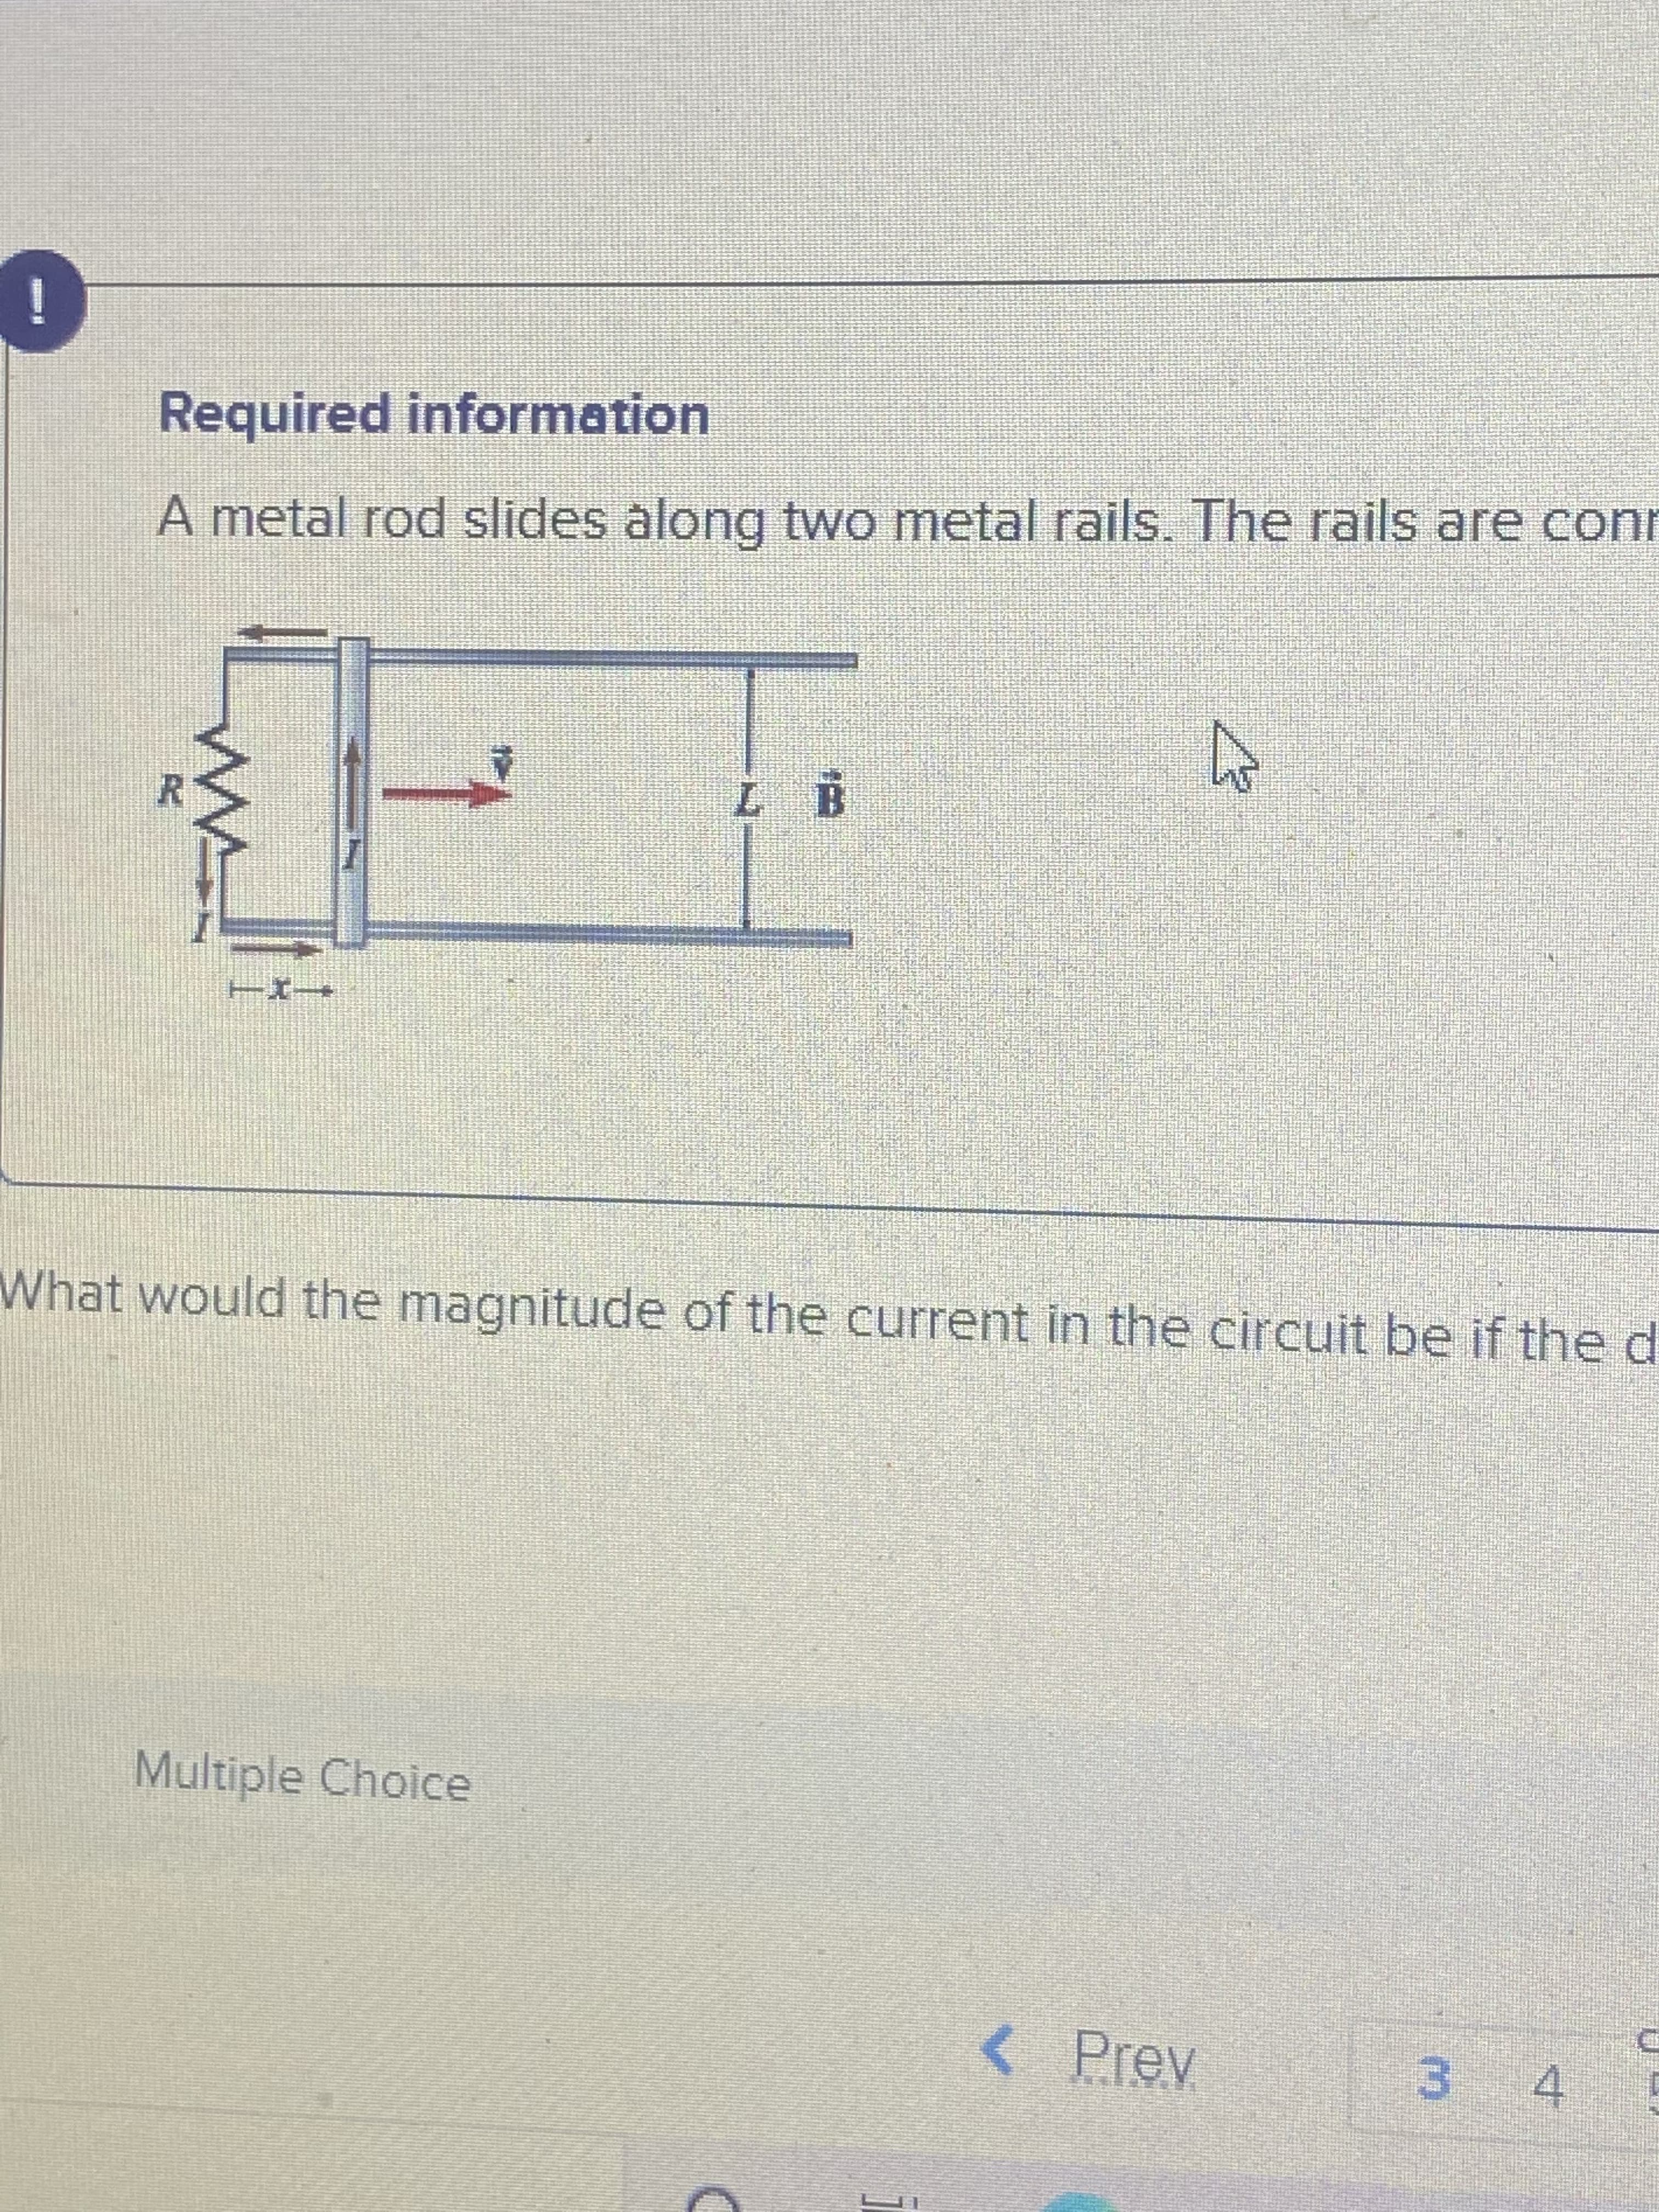 Required information
A metal rod slides along two metal rails. The rails are conr
What would the magnitude of the current in the circuit be if the d
Multiple Choice
< Prev
3 4 5
